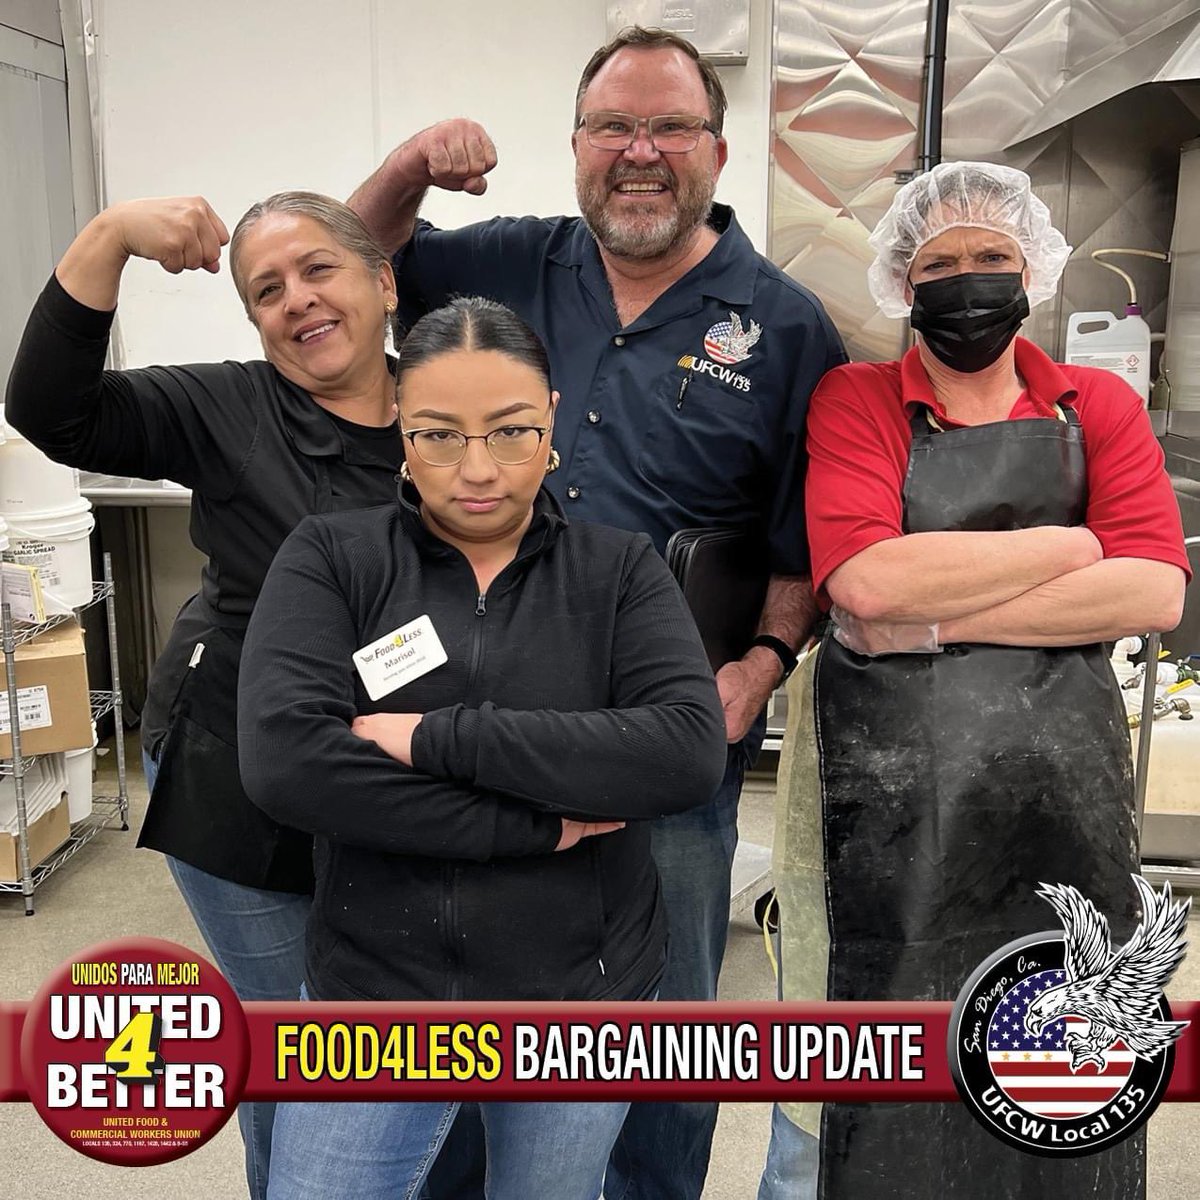 The company offered a weak economic proposal. Read the Food4Less bargaining update here: ufcw135.com/f4l-bargaining…